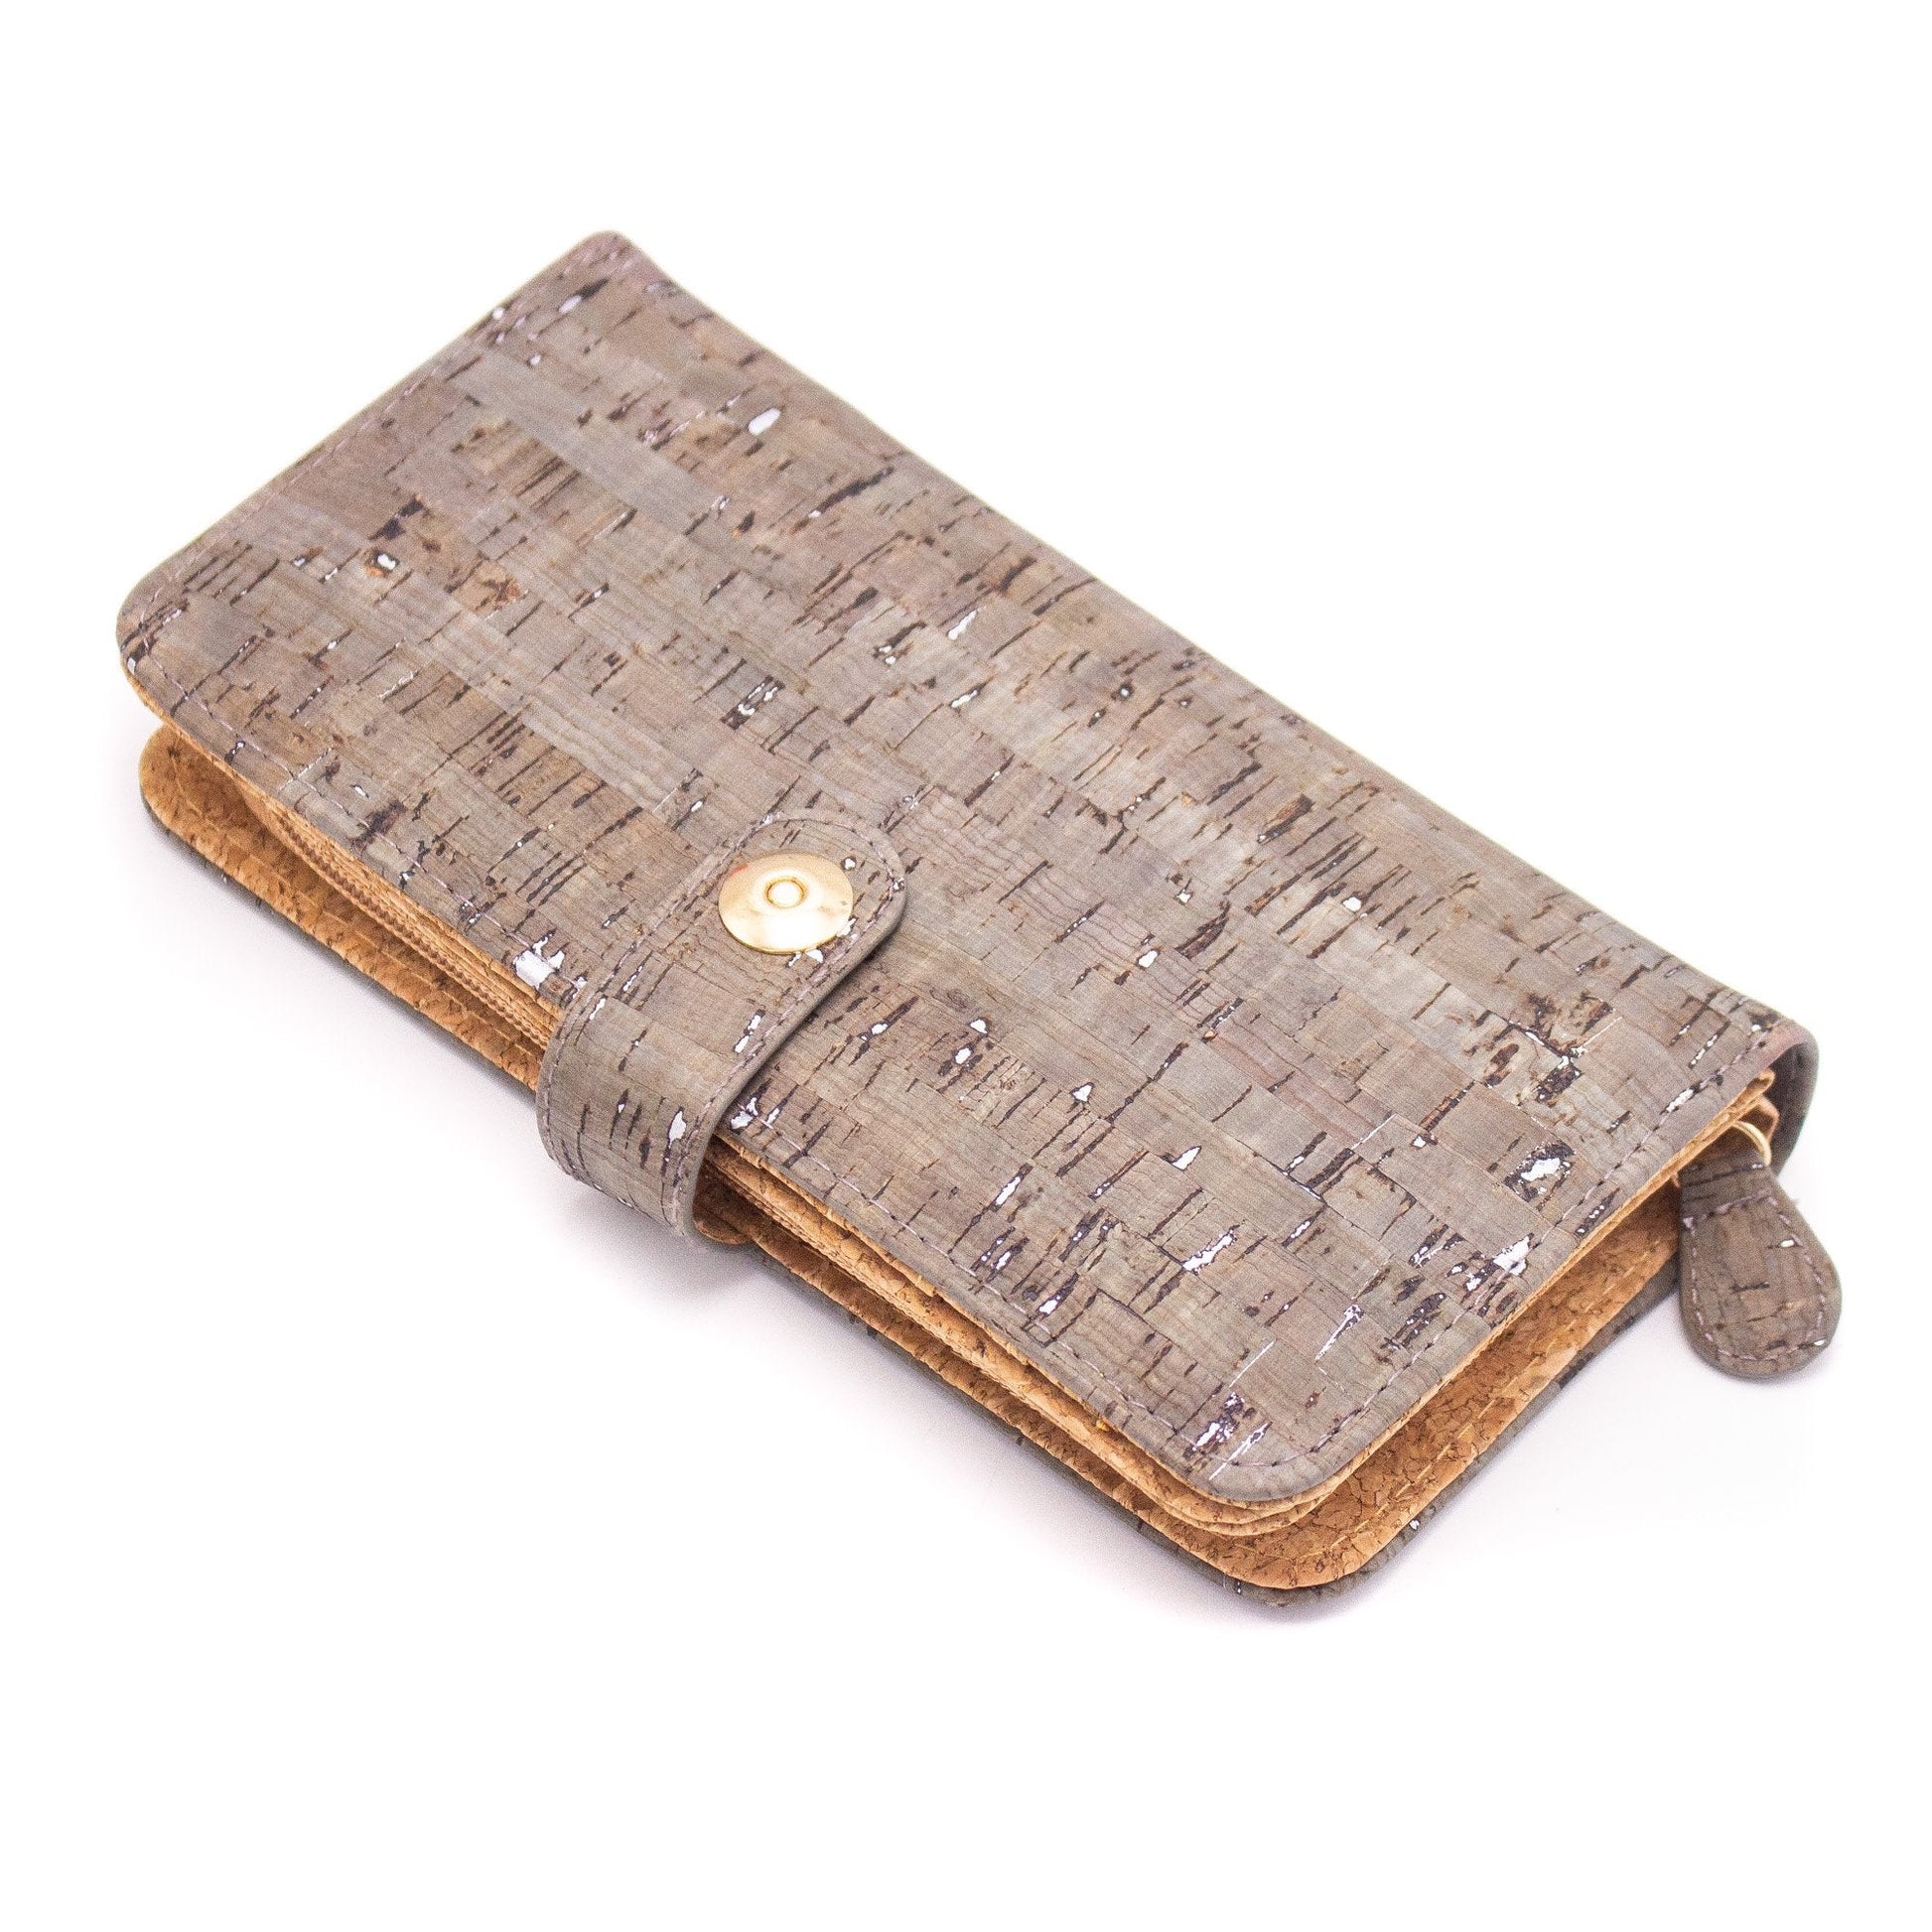 Green & Silver with magnet closure Cork Wallet | THE CORK COLLECTION